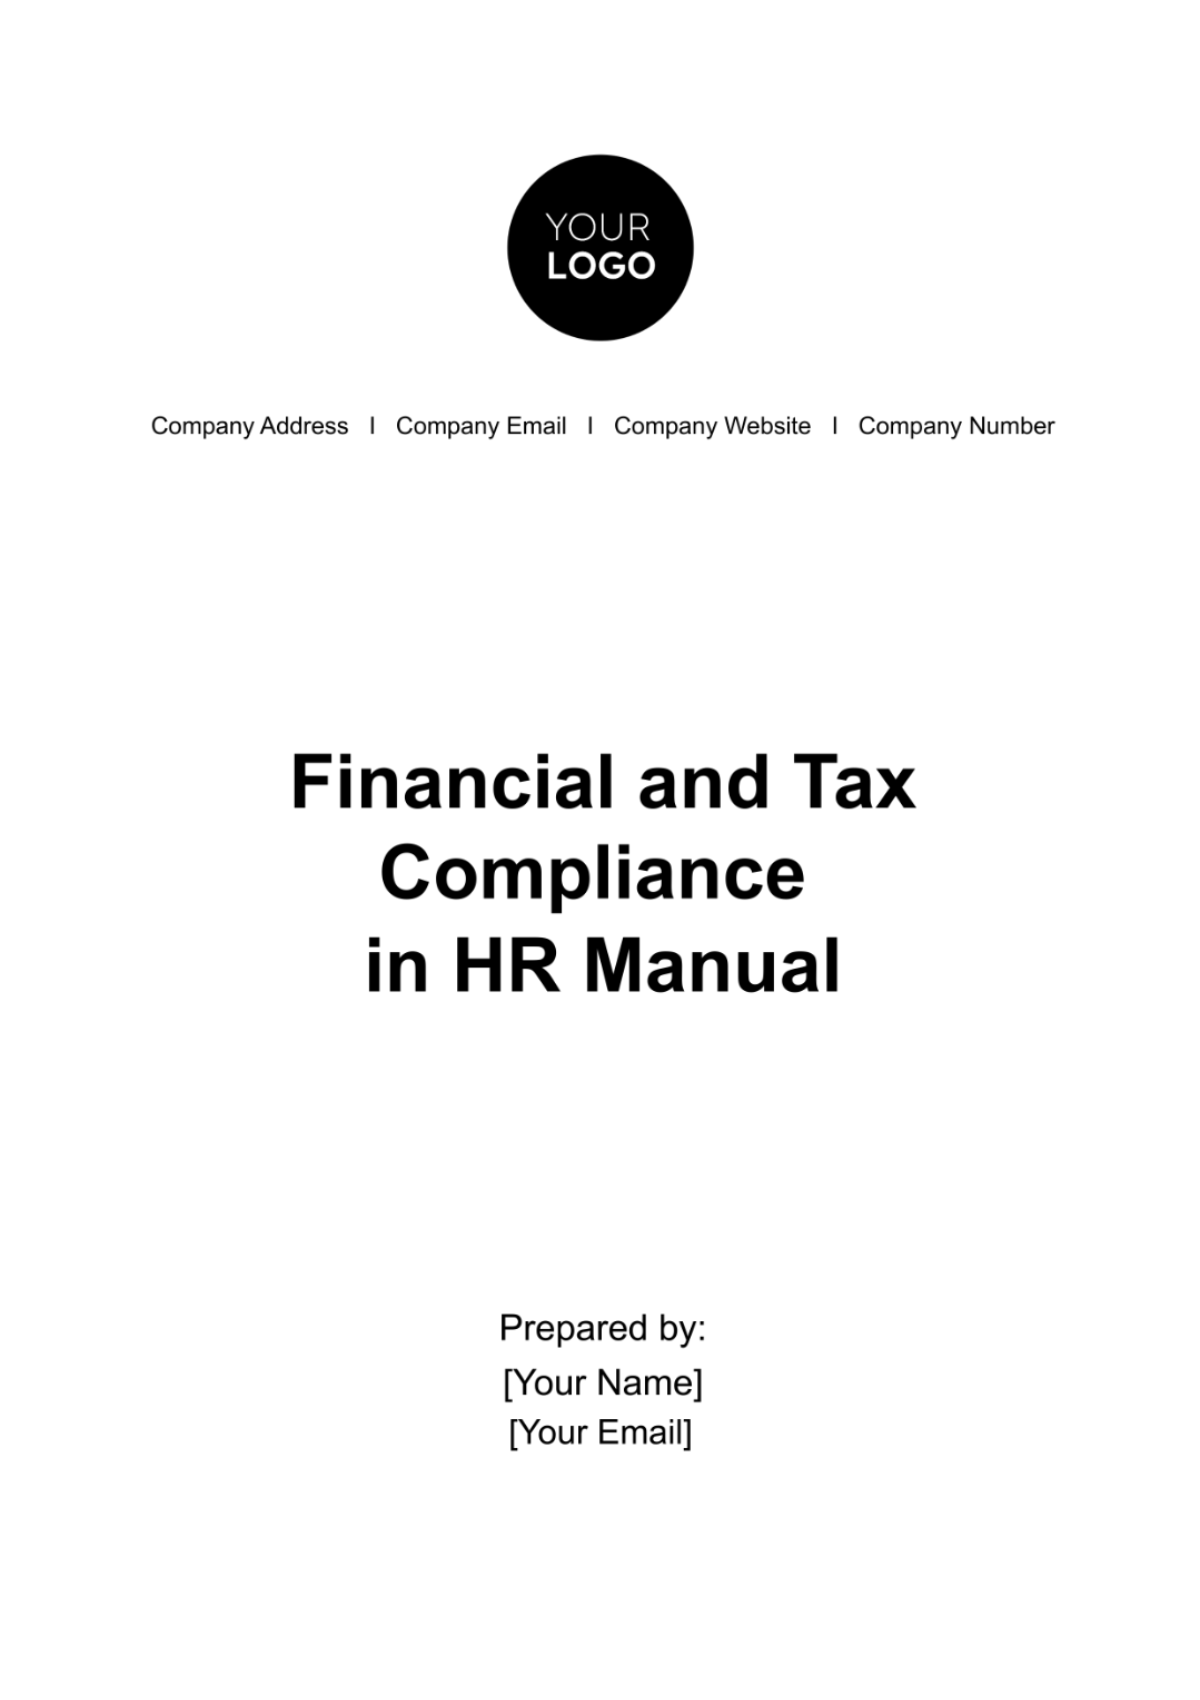 Financial and Tax Compliance in HR Manual Template